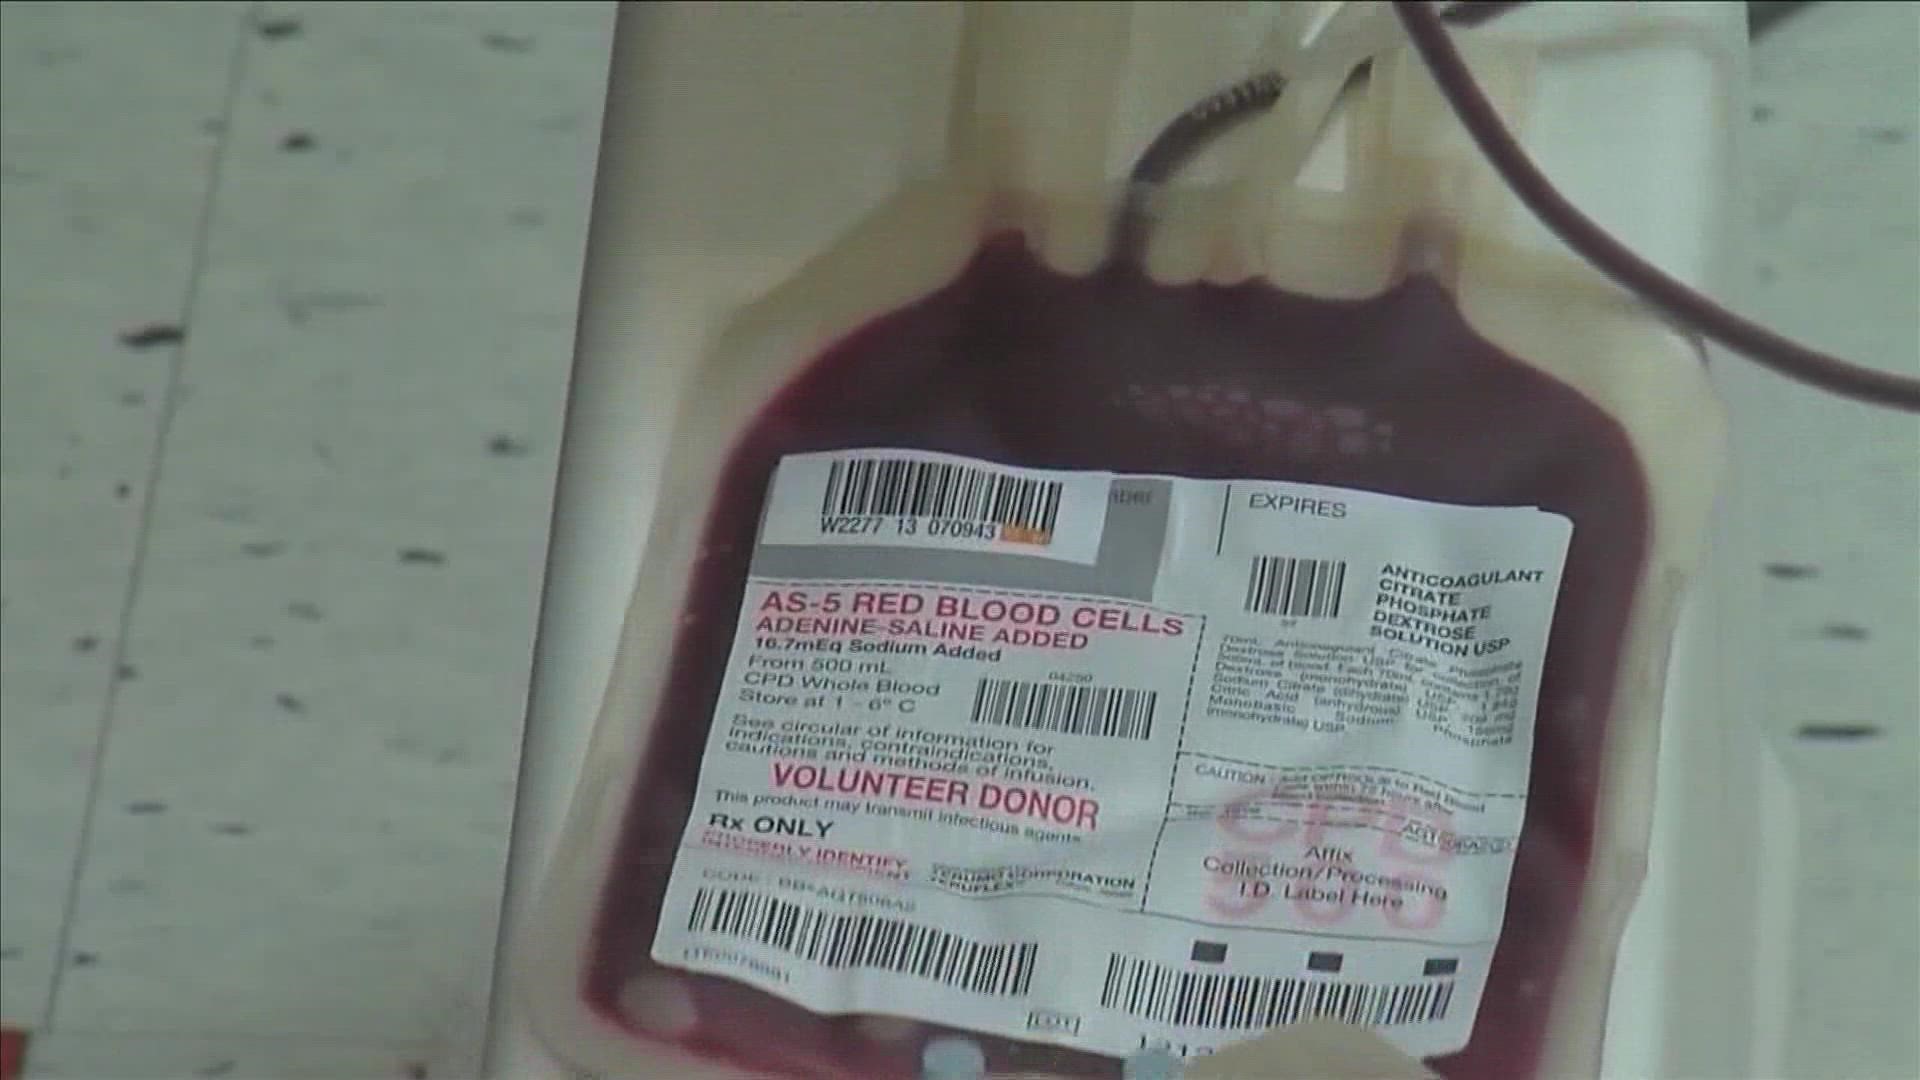 Blood donations are down nationwide, and that includes right here in Memphis. While many may feel the urge to donate, there are some who get denied.